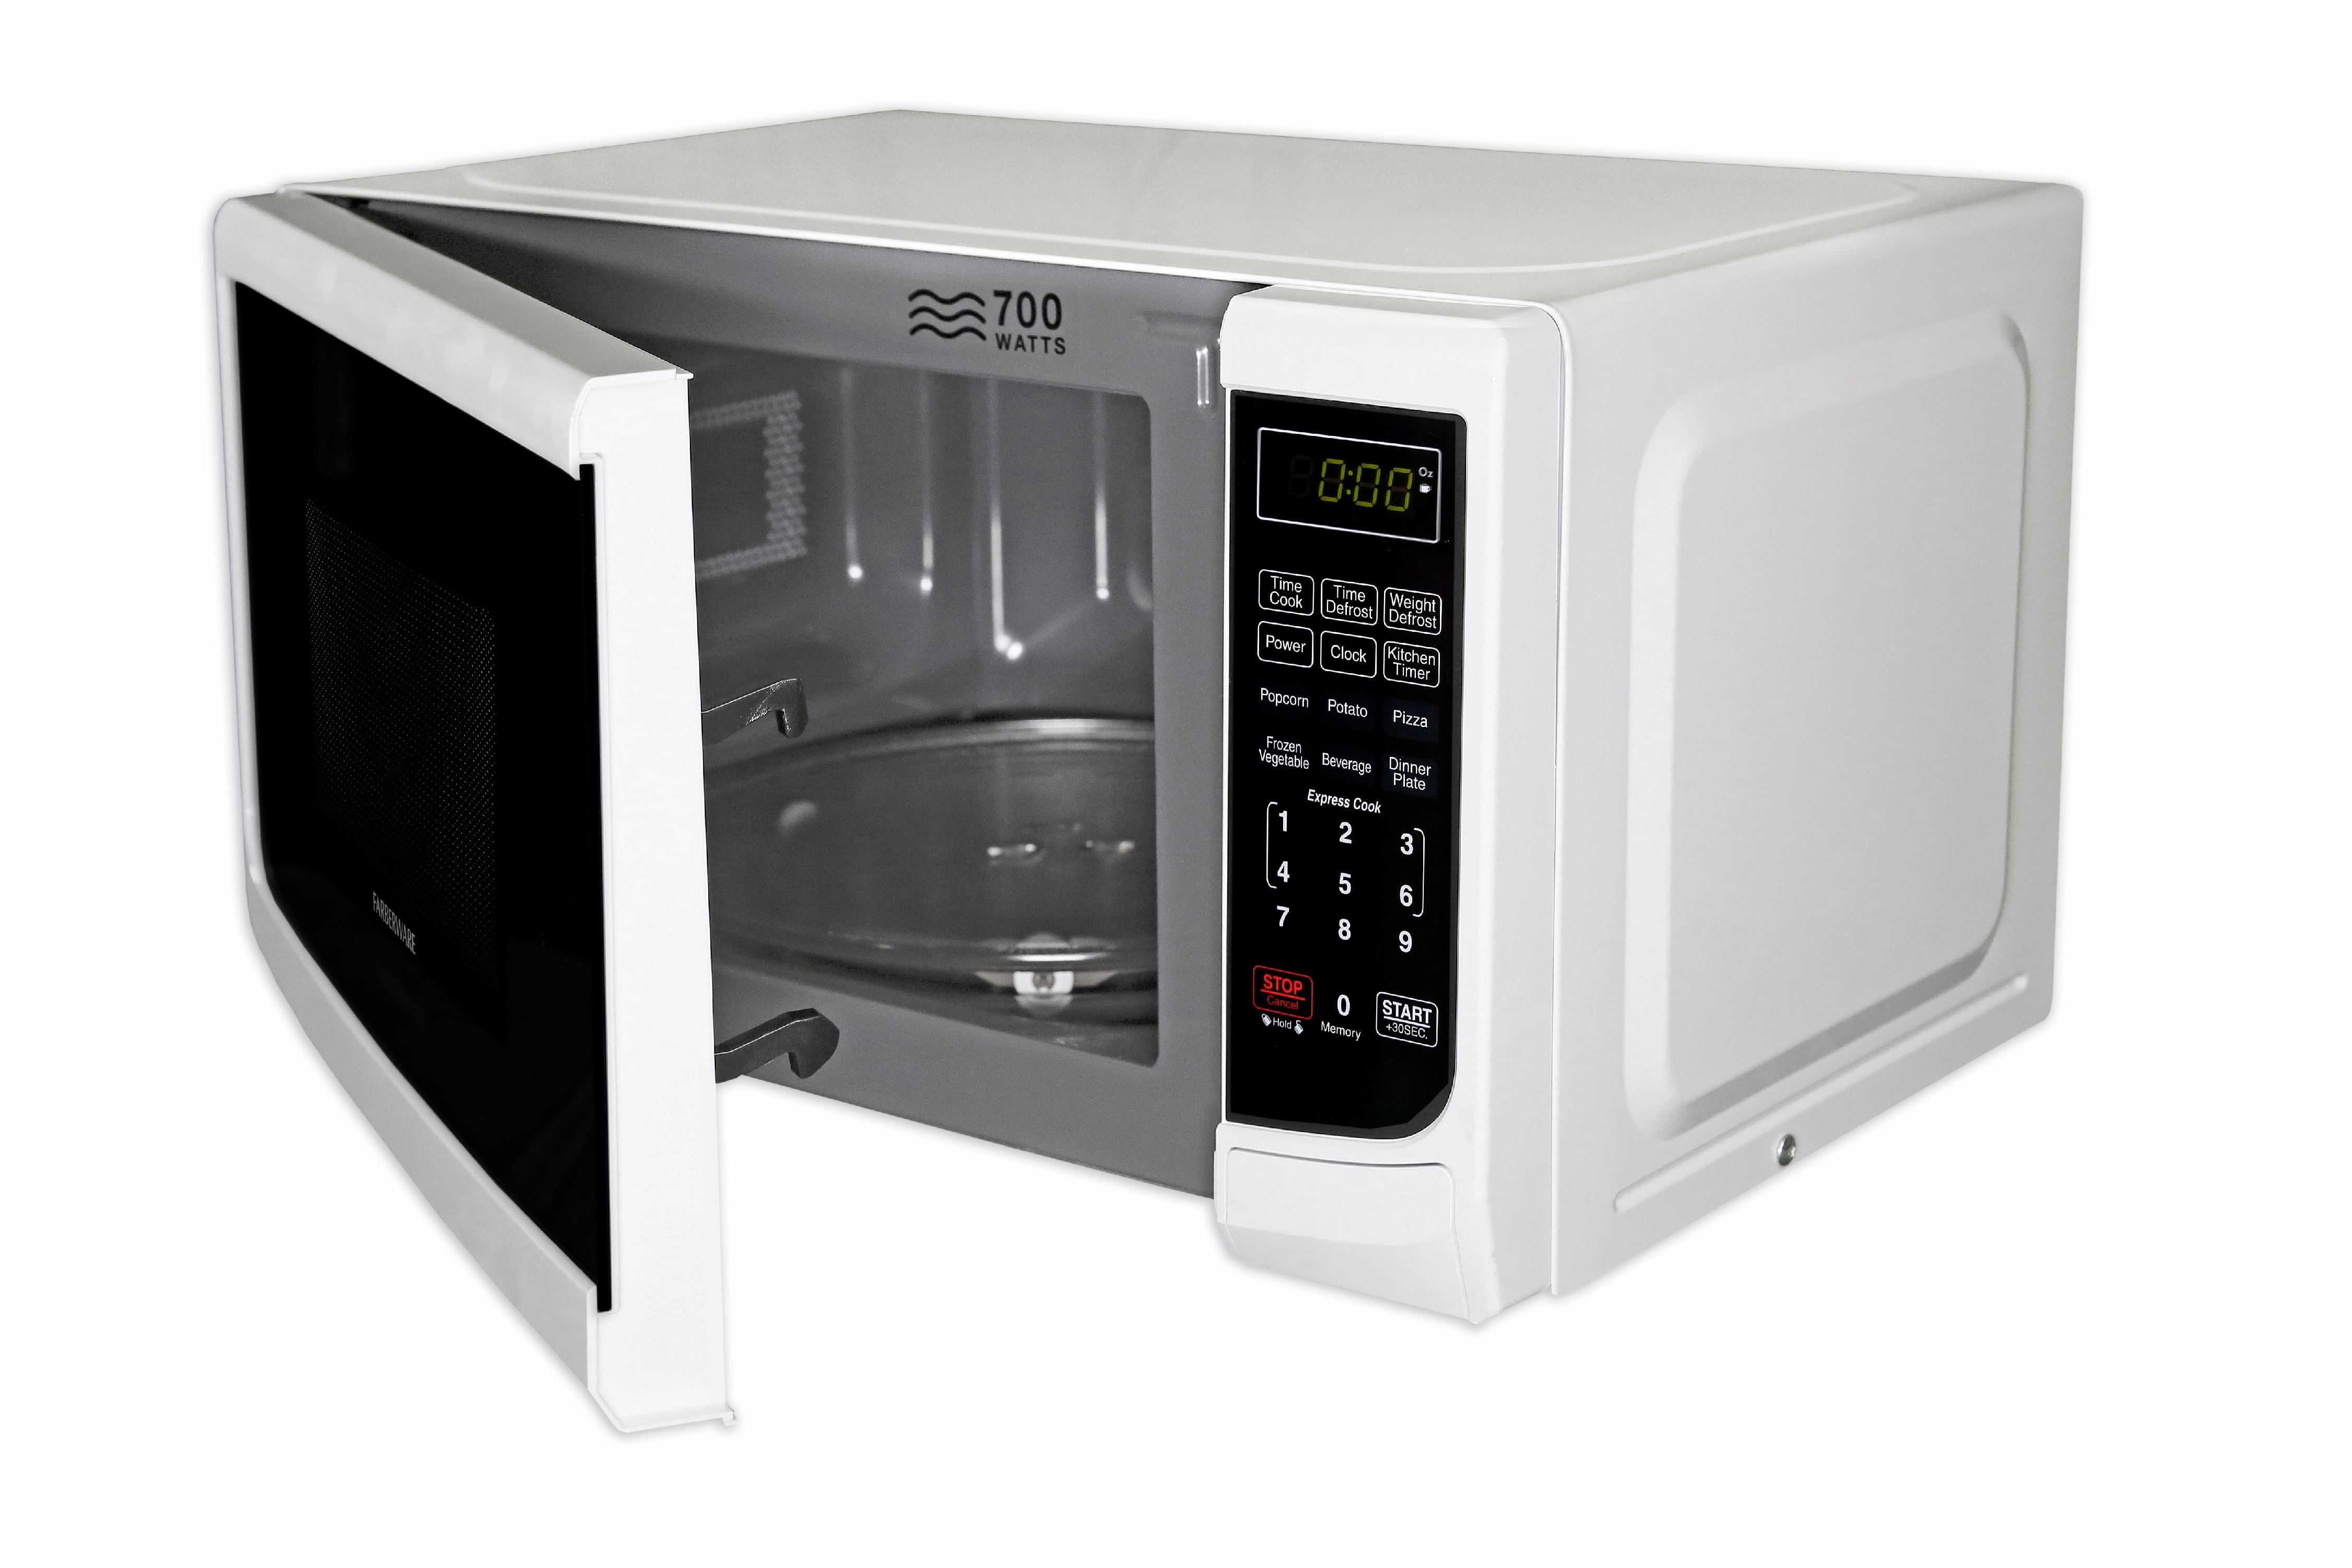 Farberware Compact 0.7 Cubic Ft Microwave Oven